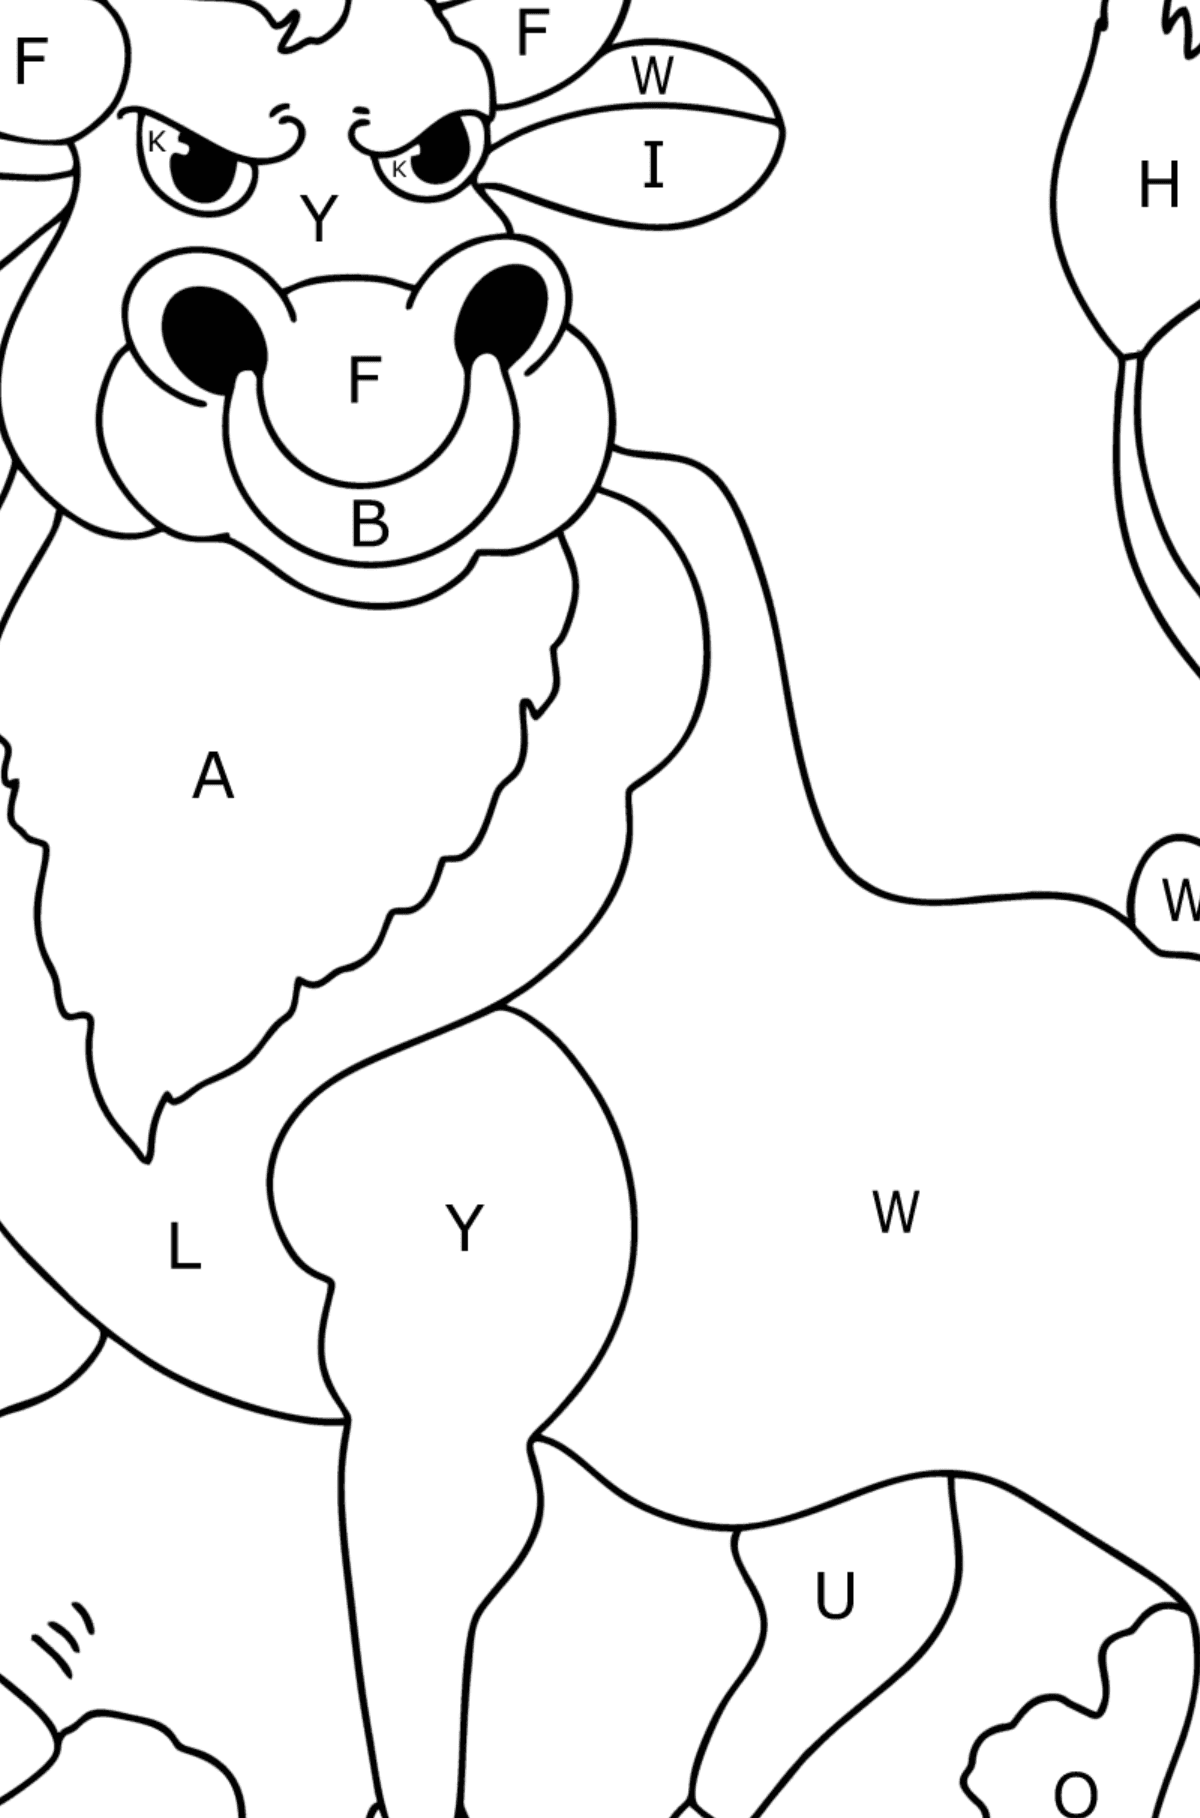 Brave bull Coloring page - Coloring by Letters for Kids